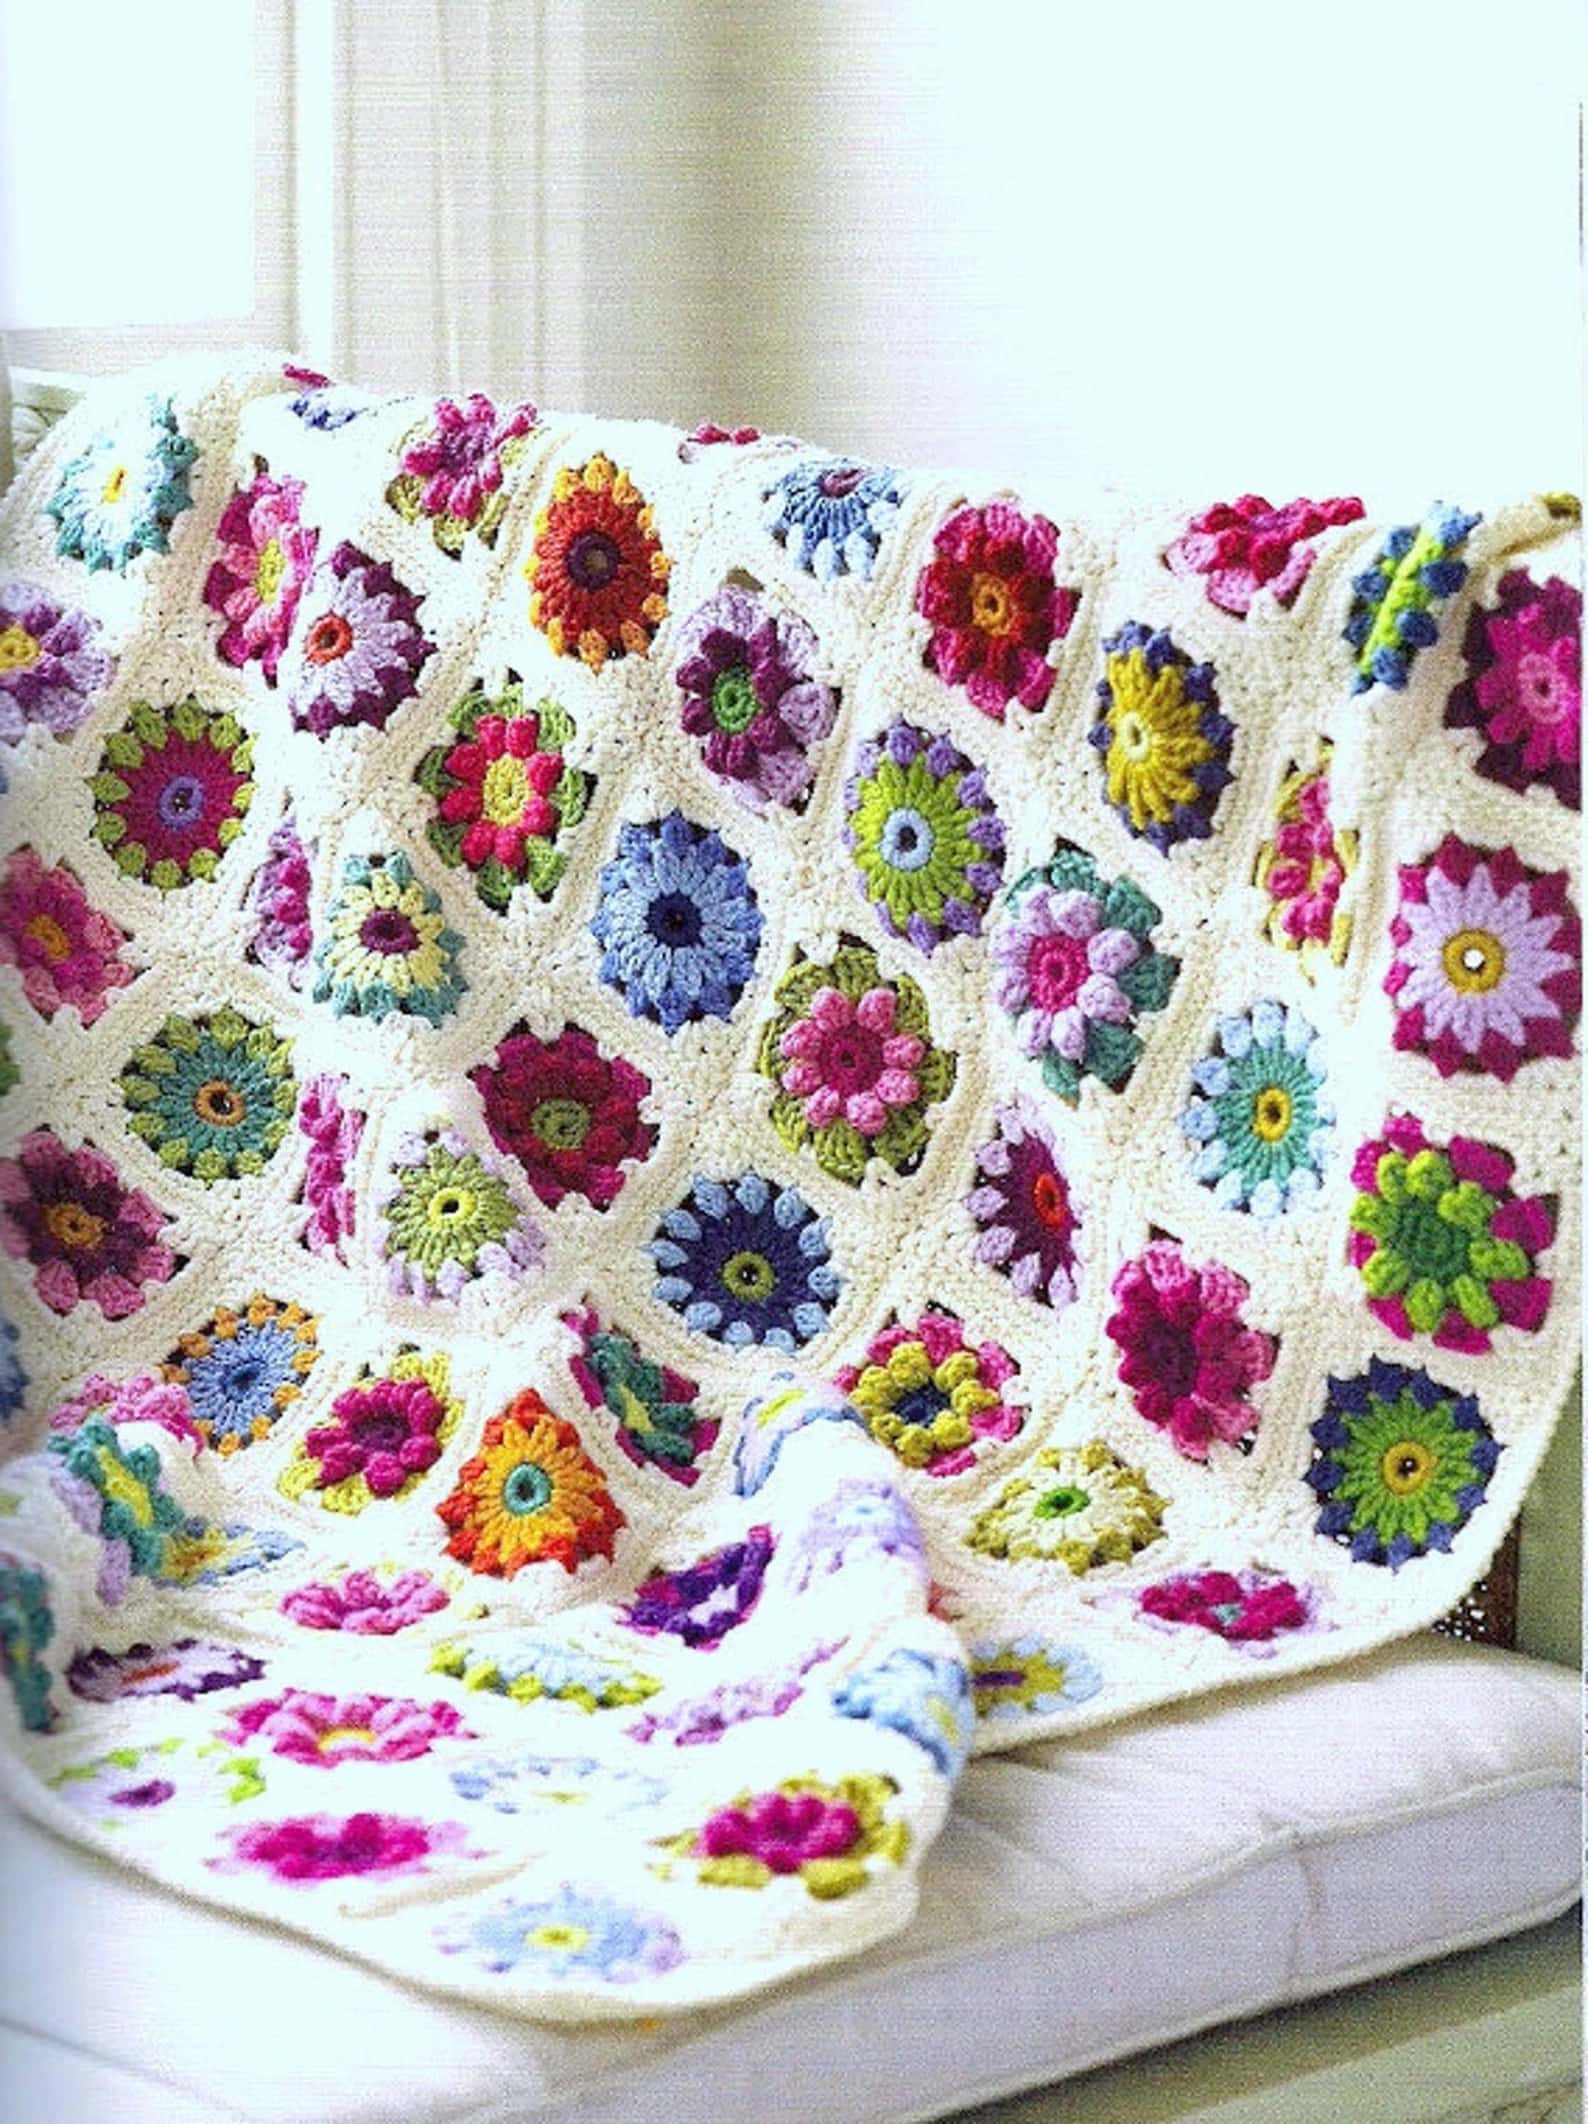 roses and daisies granny square crochet pattern to make a beautiful blanket sprinkled with flowers